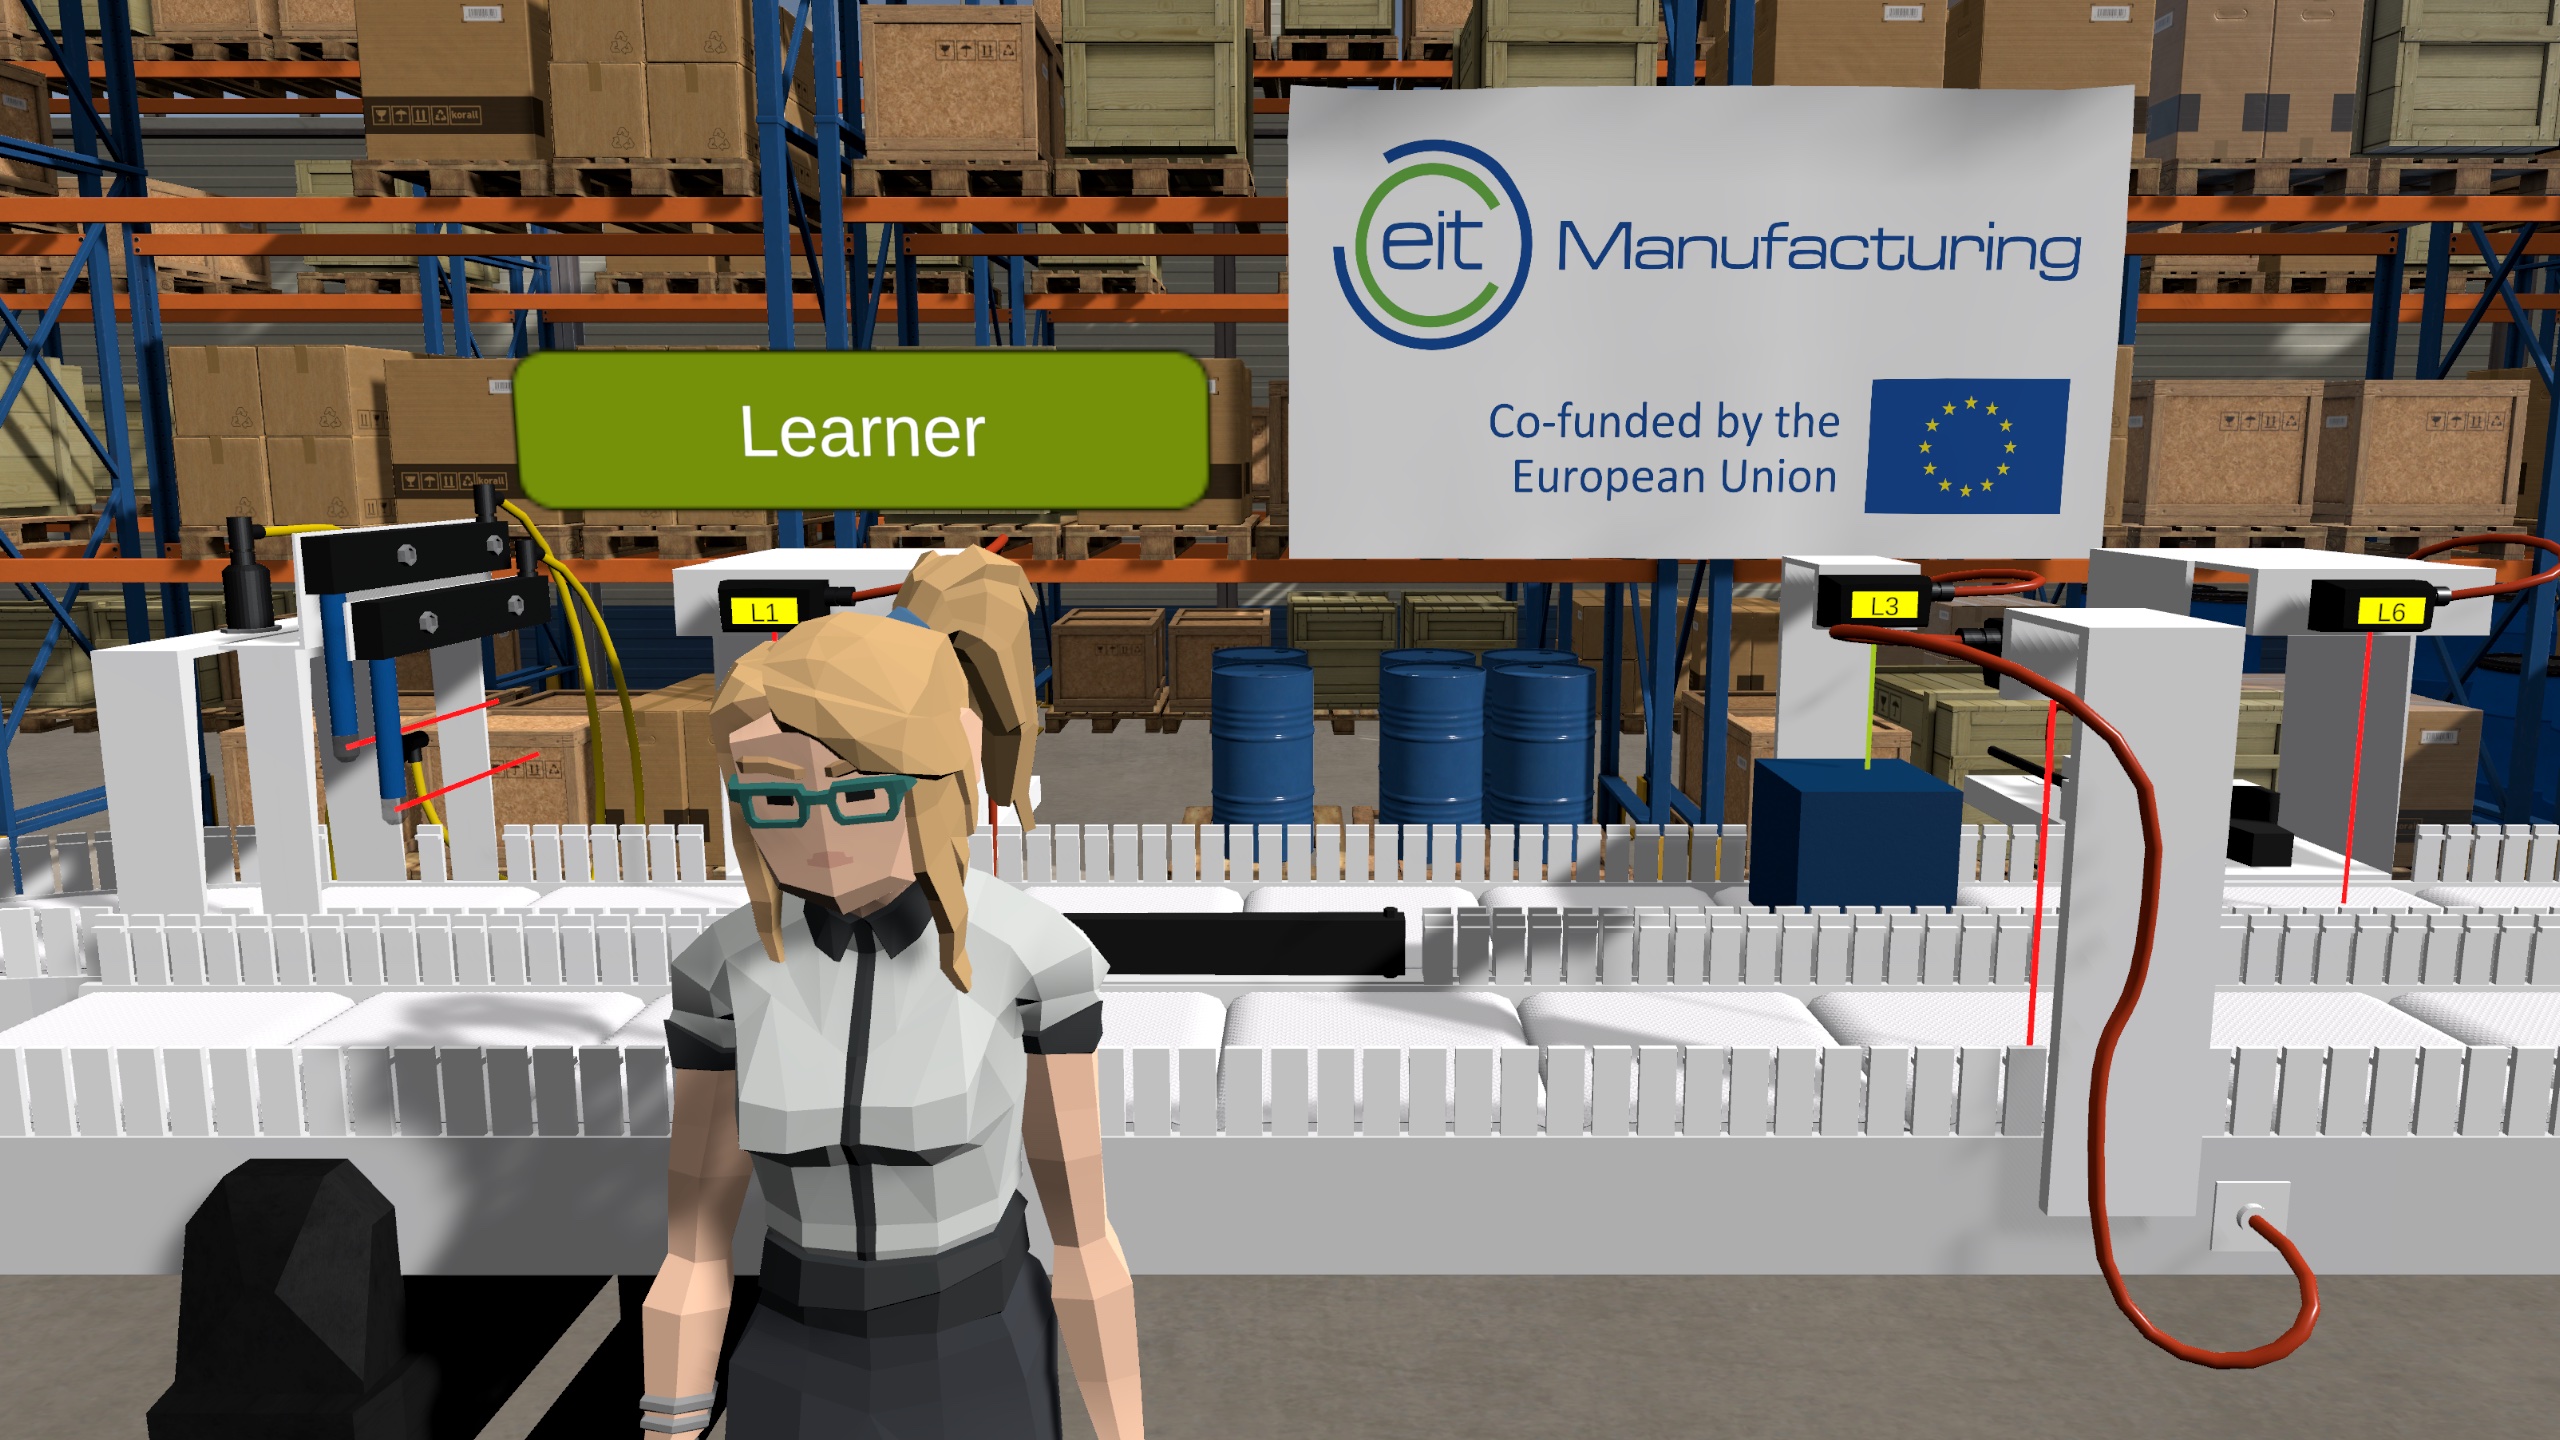 Screenshot of a VR environment. An avatar of a learner is standing in front of a production line.